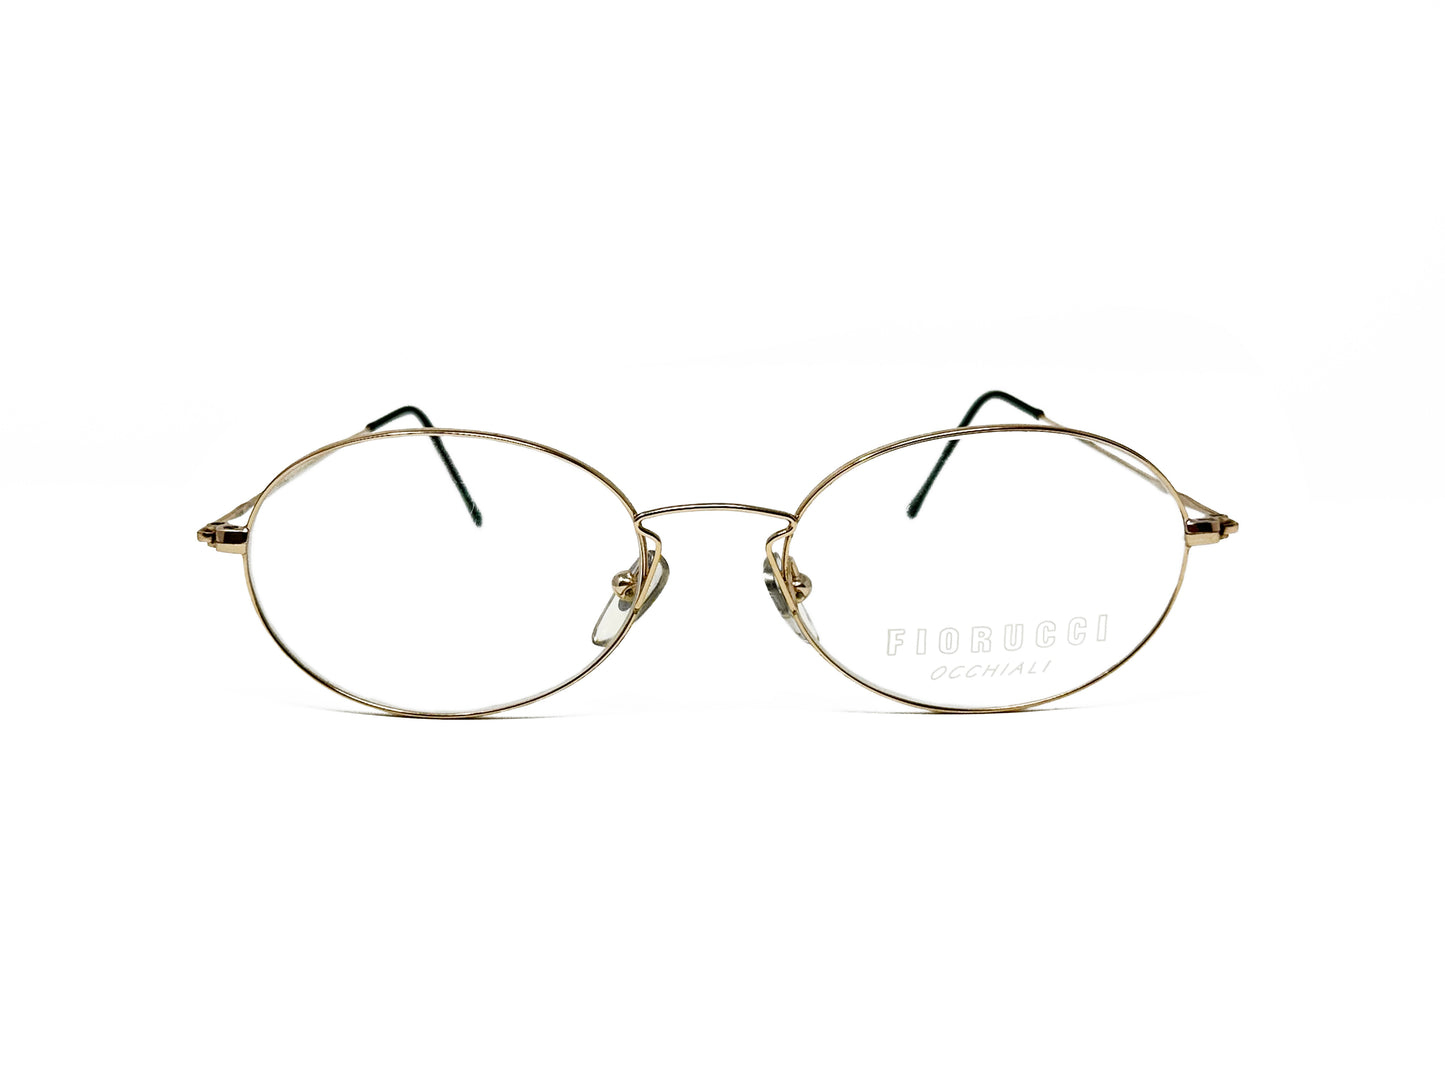 Fiorucci Occhiali oval, metal optical frame. Model: M24. Color: 1 - White gold. Front view. 